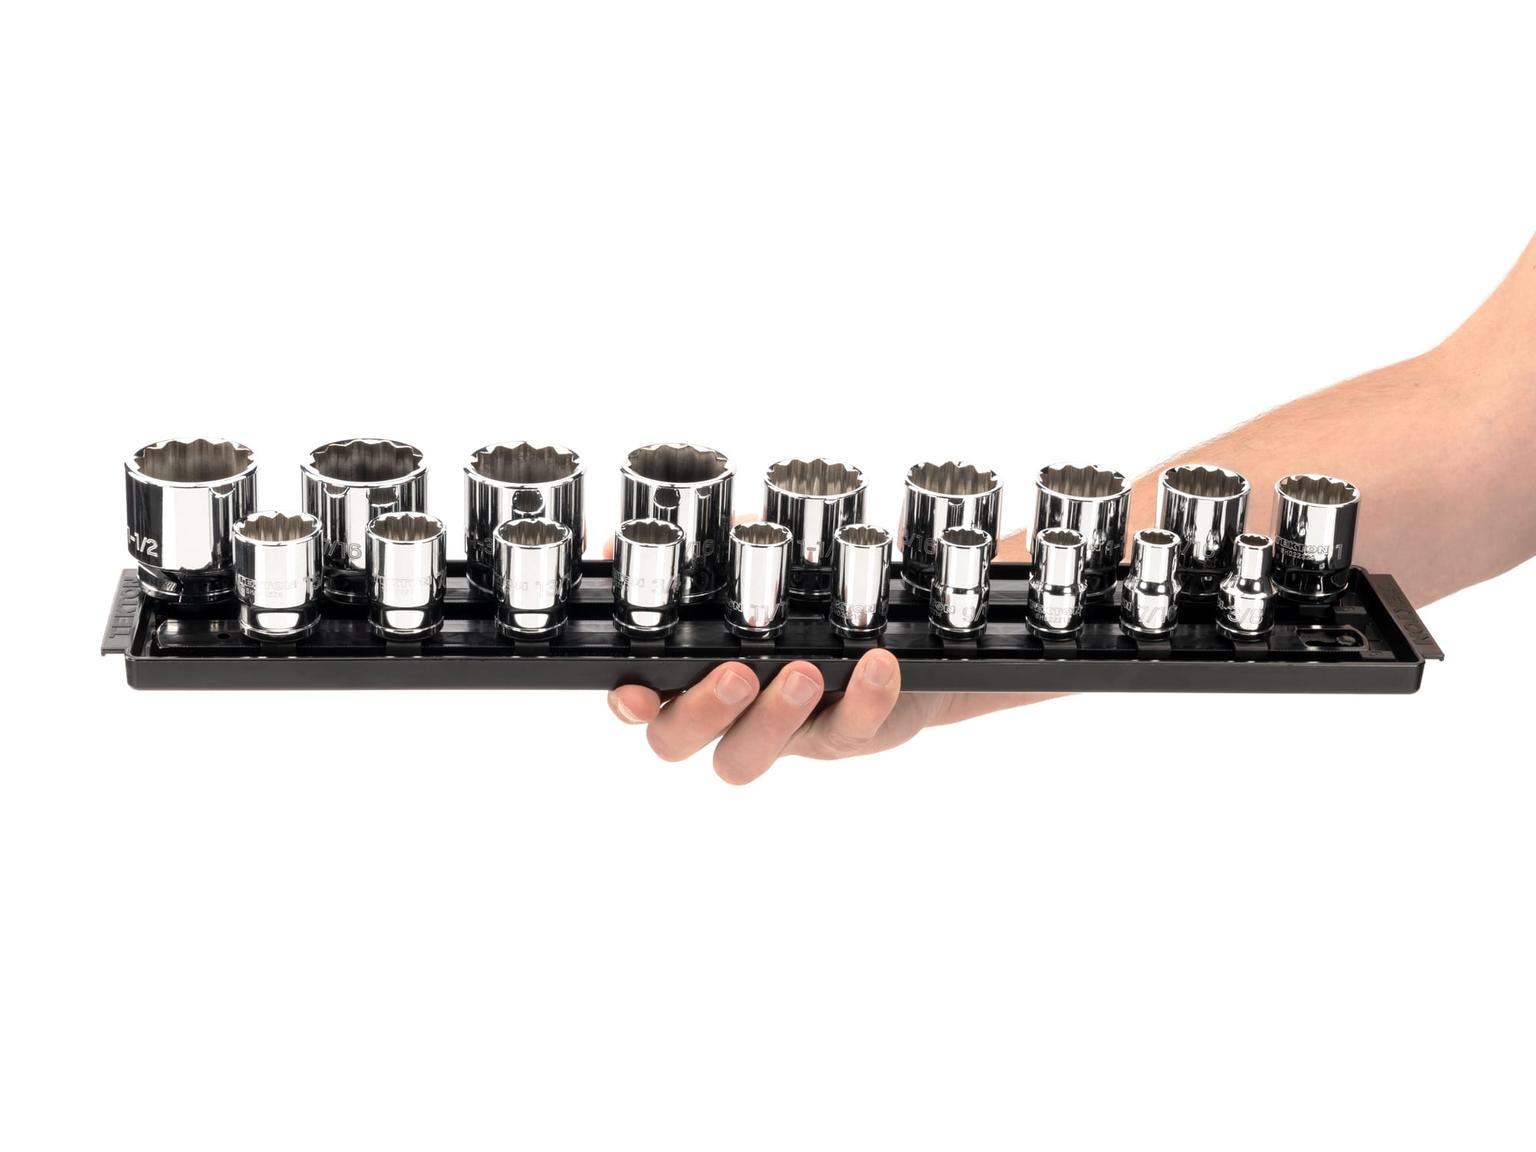 TEKTON SHD92126-T 1/2 Inch Drive 12-Point Socket Set with Rails, 19-Piece (3/8-1-1/2 in.)